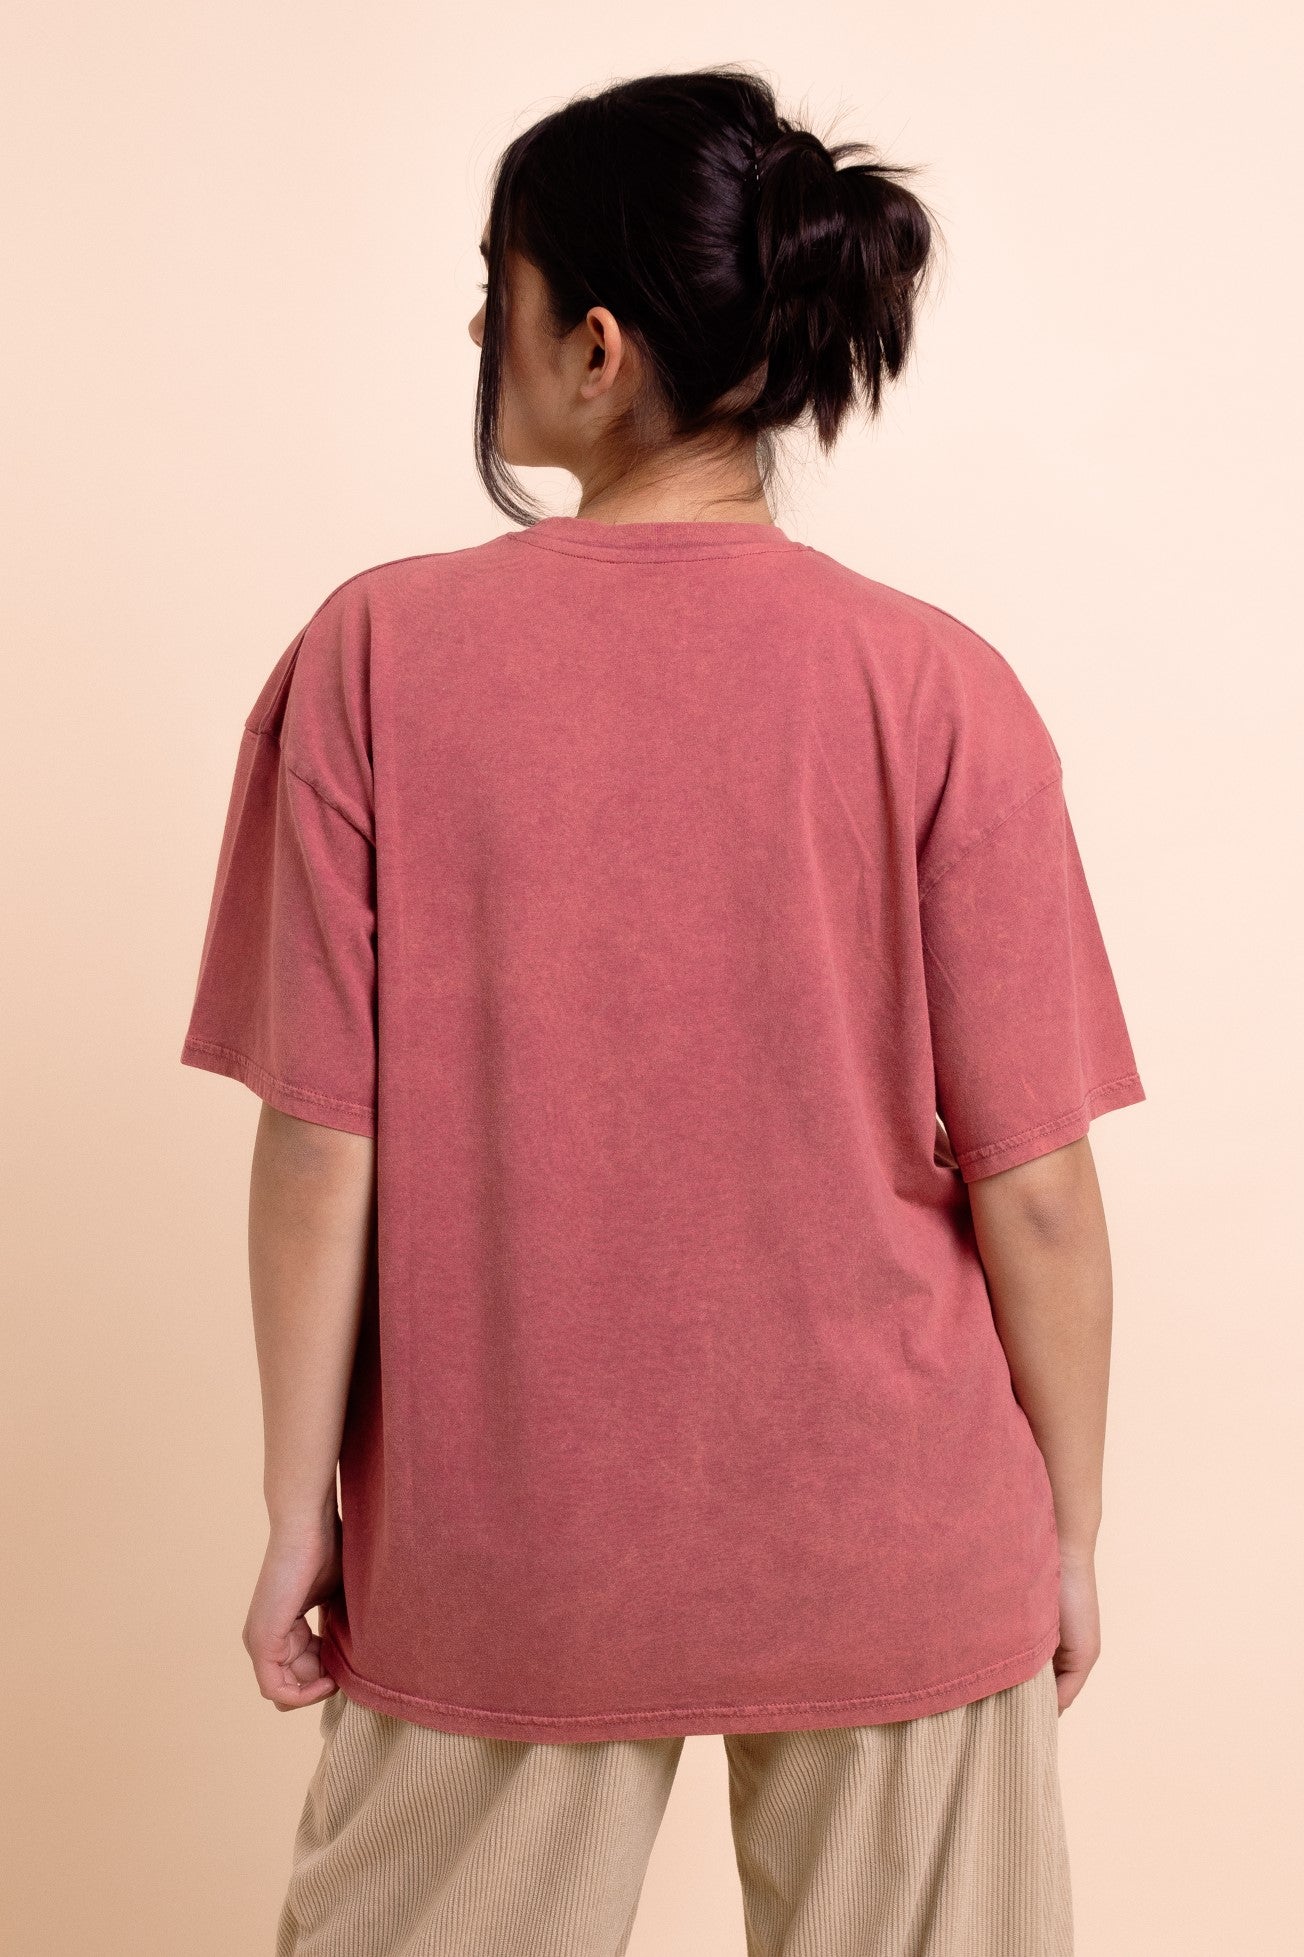 Daisy Street - Red Vintage-Washed Ethereal Earth Relaxed Tee